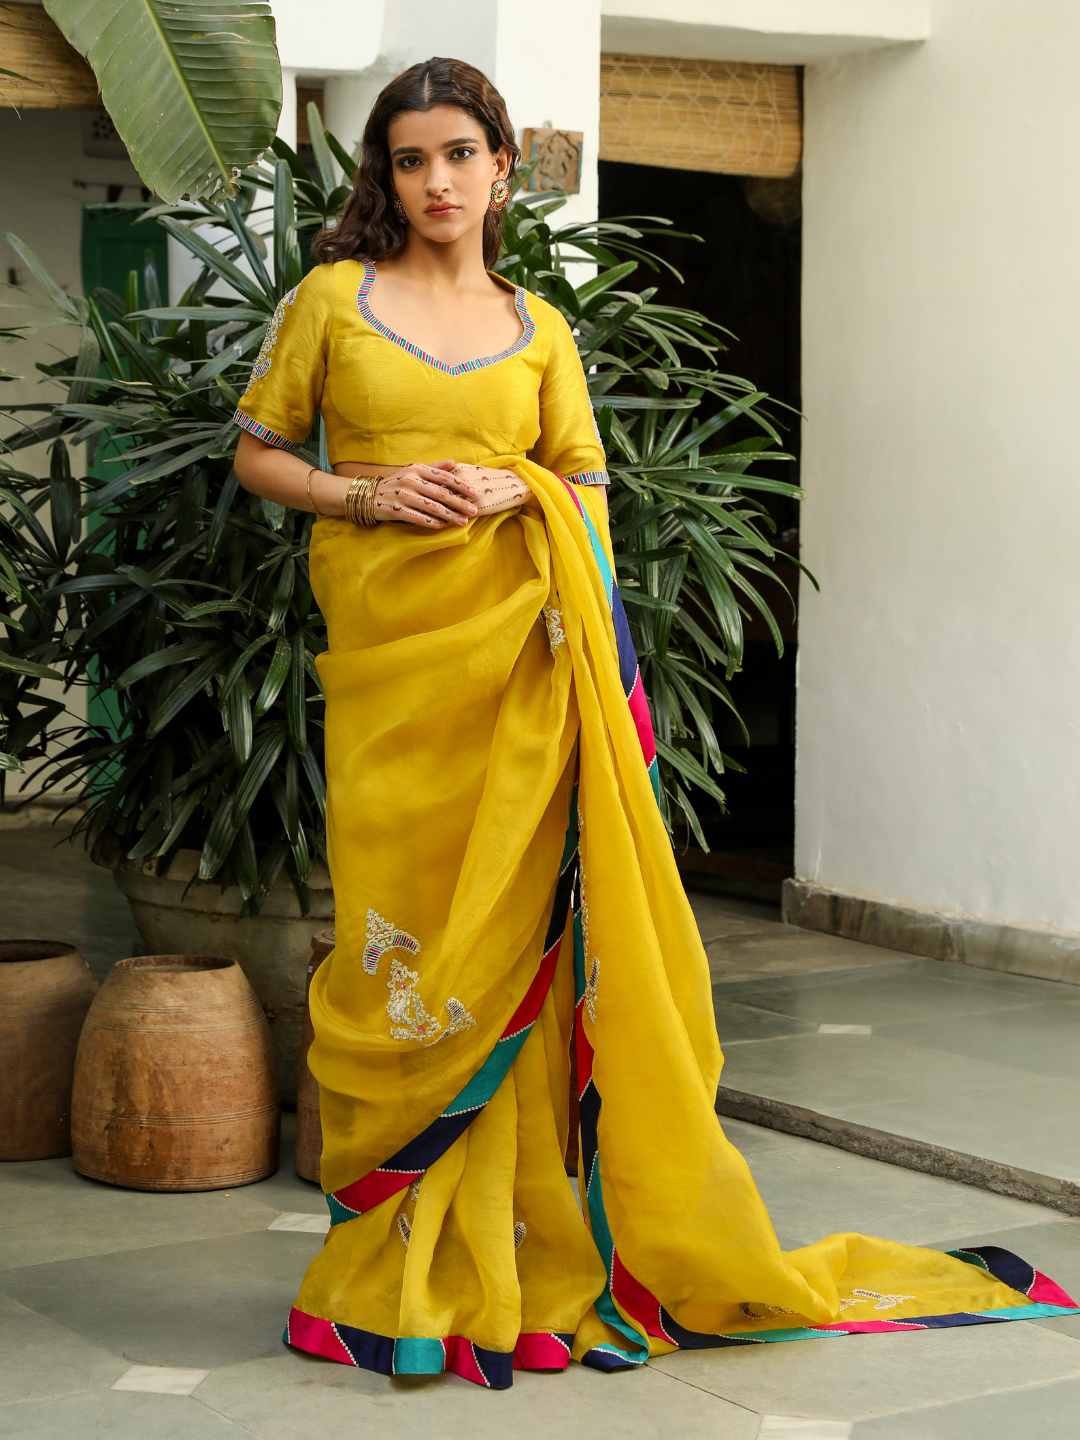 Yellow Viscose Silk Saree Set with Resham Embroidery at Kamakhyaa by RoohbyRidhimaa. This item is Embroidered, Festive Wear, Free Size, Resham Embroidered, Saree Sets, Silk Organza, Toxin free, Viscose Raw Silk, Yellow